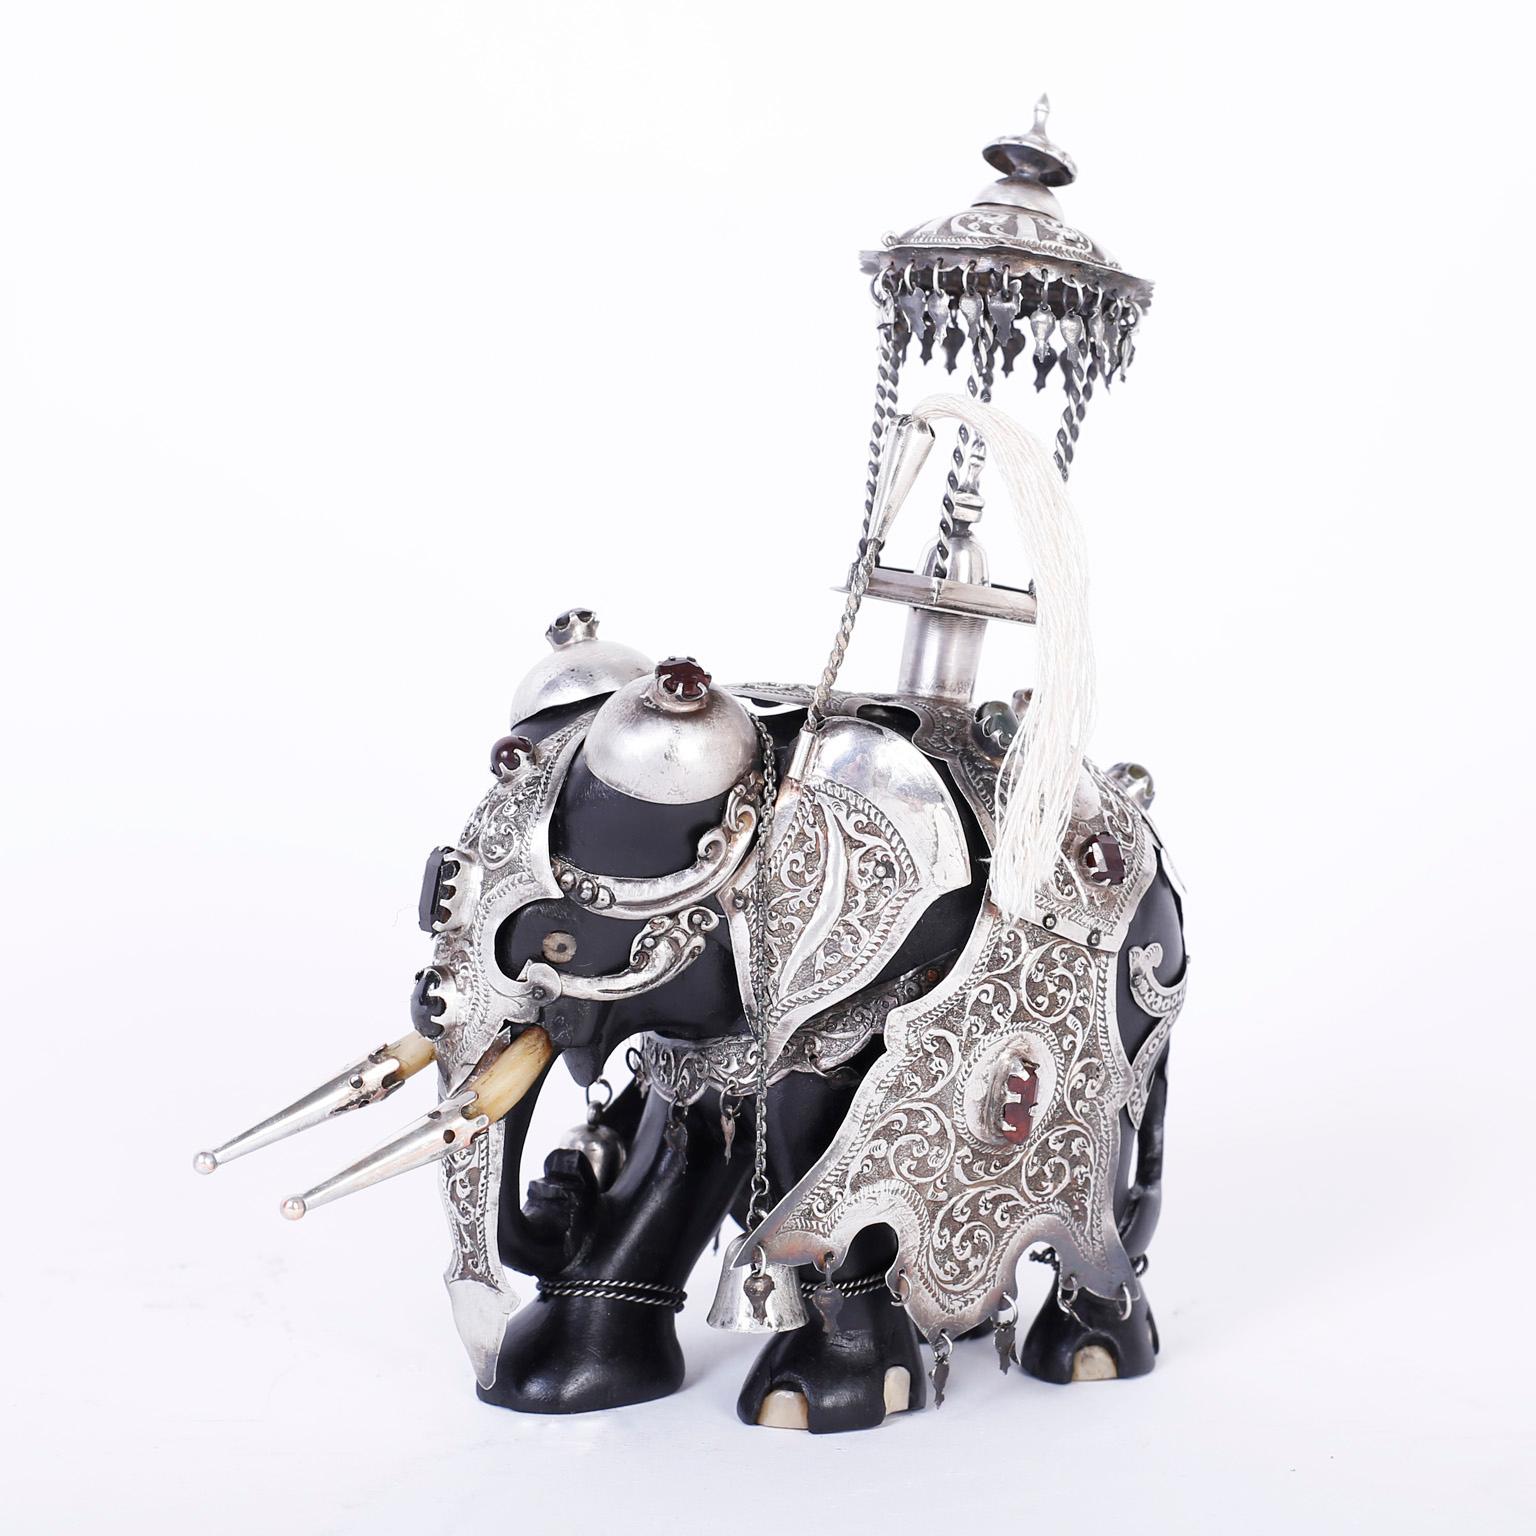 Captivating Anglo-Indian carved ebony elephant elaborately decorated in silvered metal regalia hand engraved with floral designs and highlighted with semi precious stones. Best of the genre.